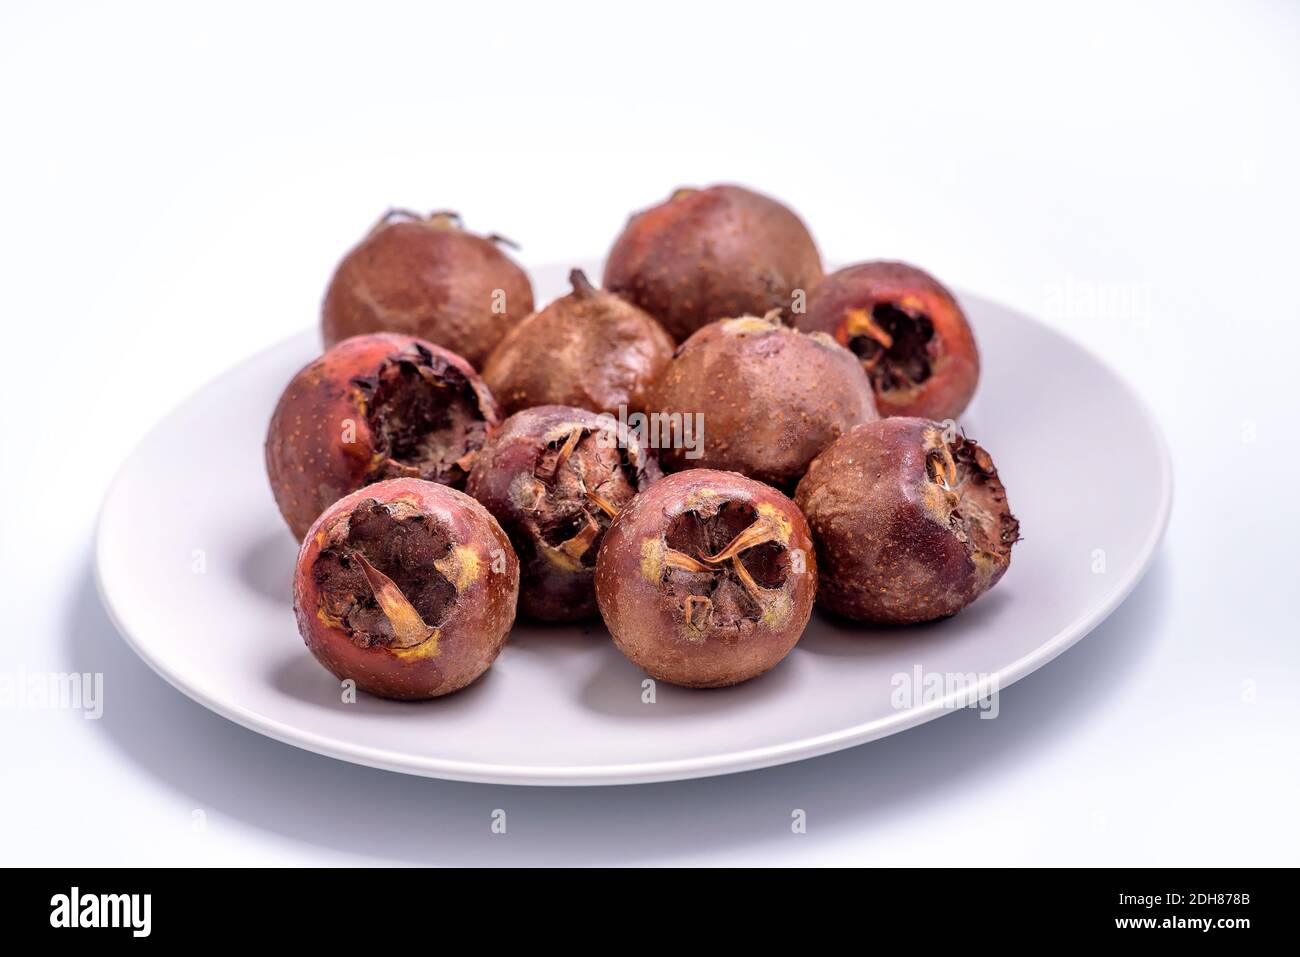 Fresh ripe organic common medlar fruit on a plate on white background. Healthy food Mespilus germanica Stock Photo